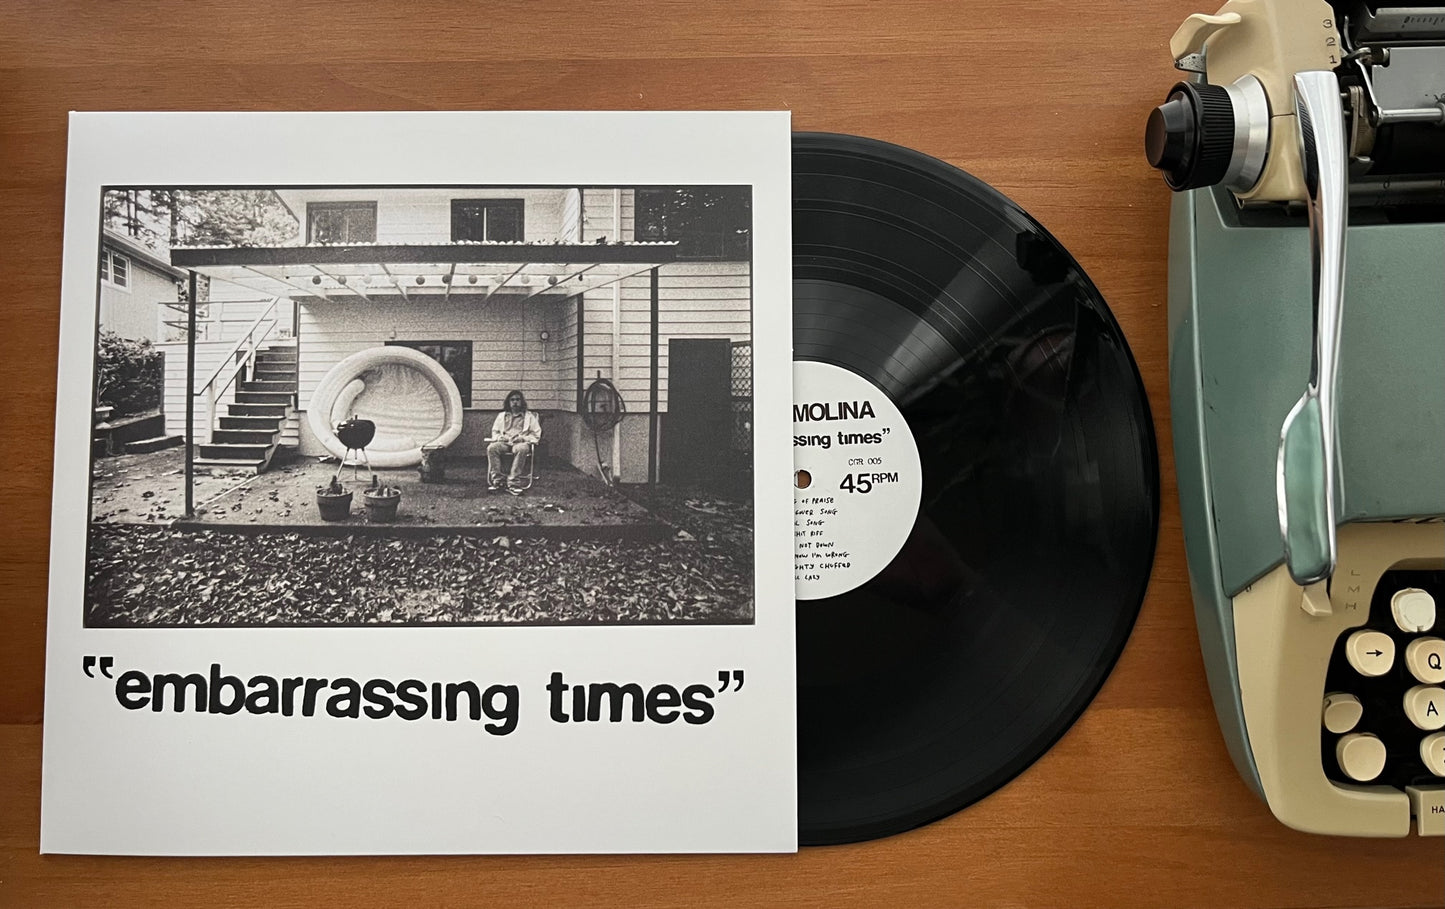 Limited Edition Black Vinyl "Embarrassing Times" by Tony Molina